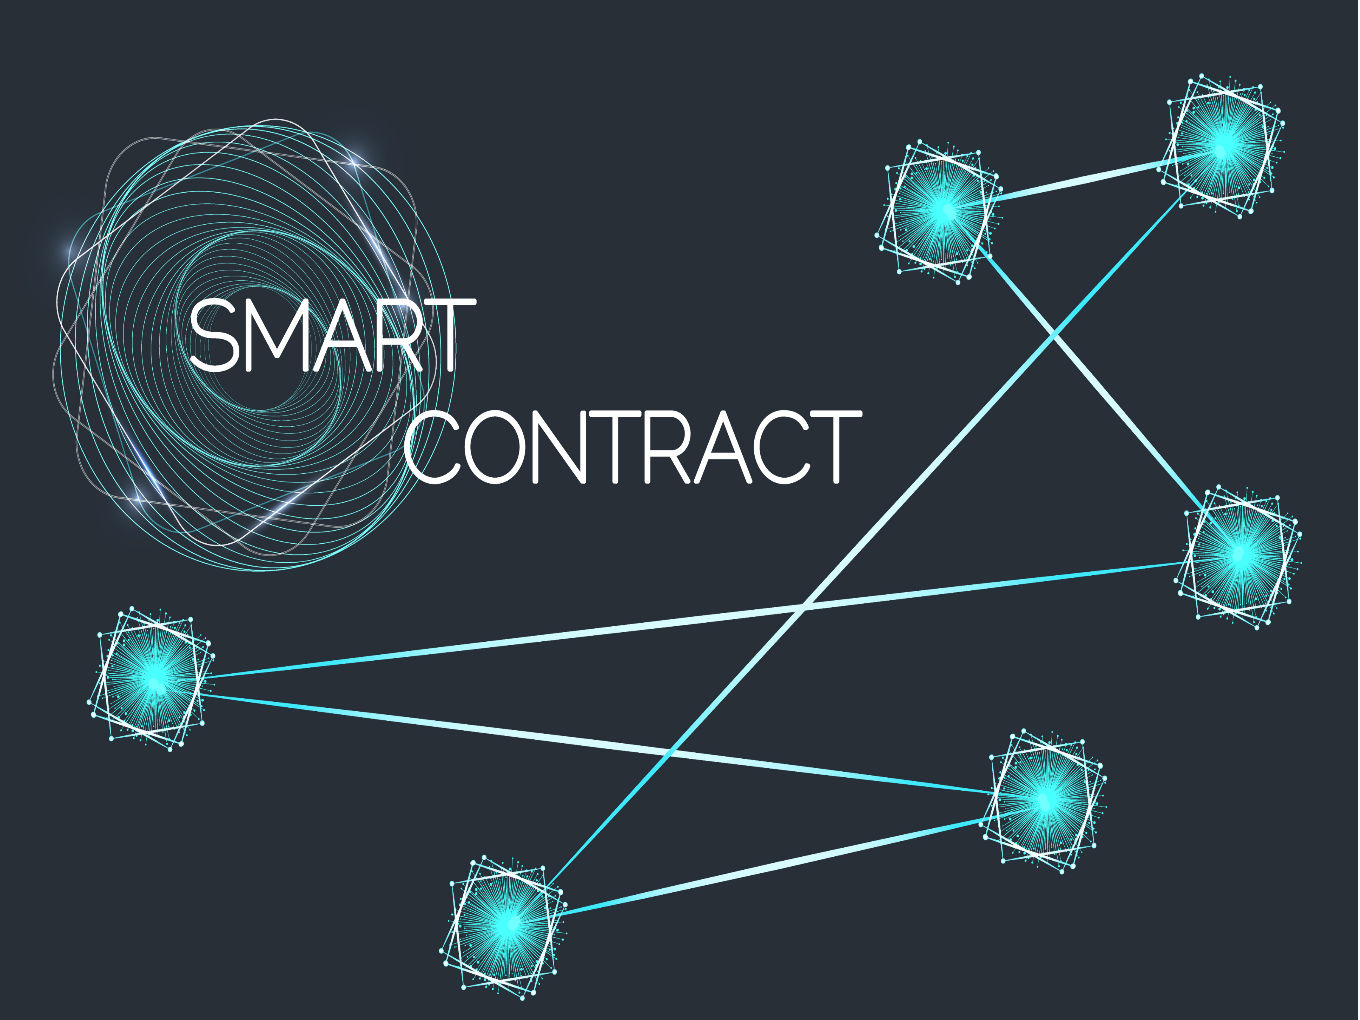 Future Potential Of Smart Contracts - A Technology On Verge Of Being Realistic